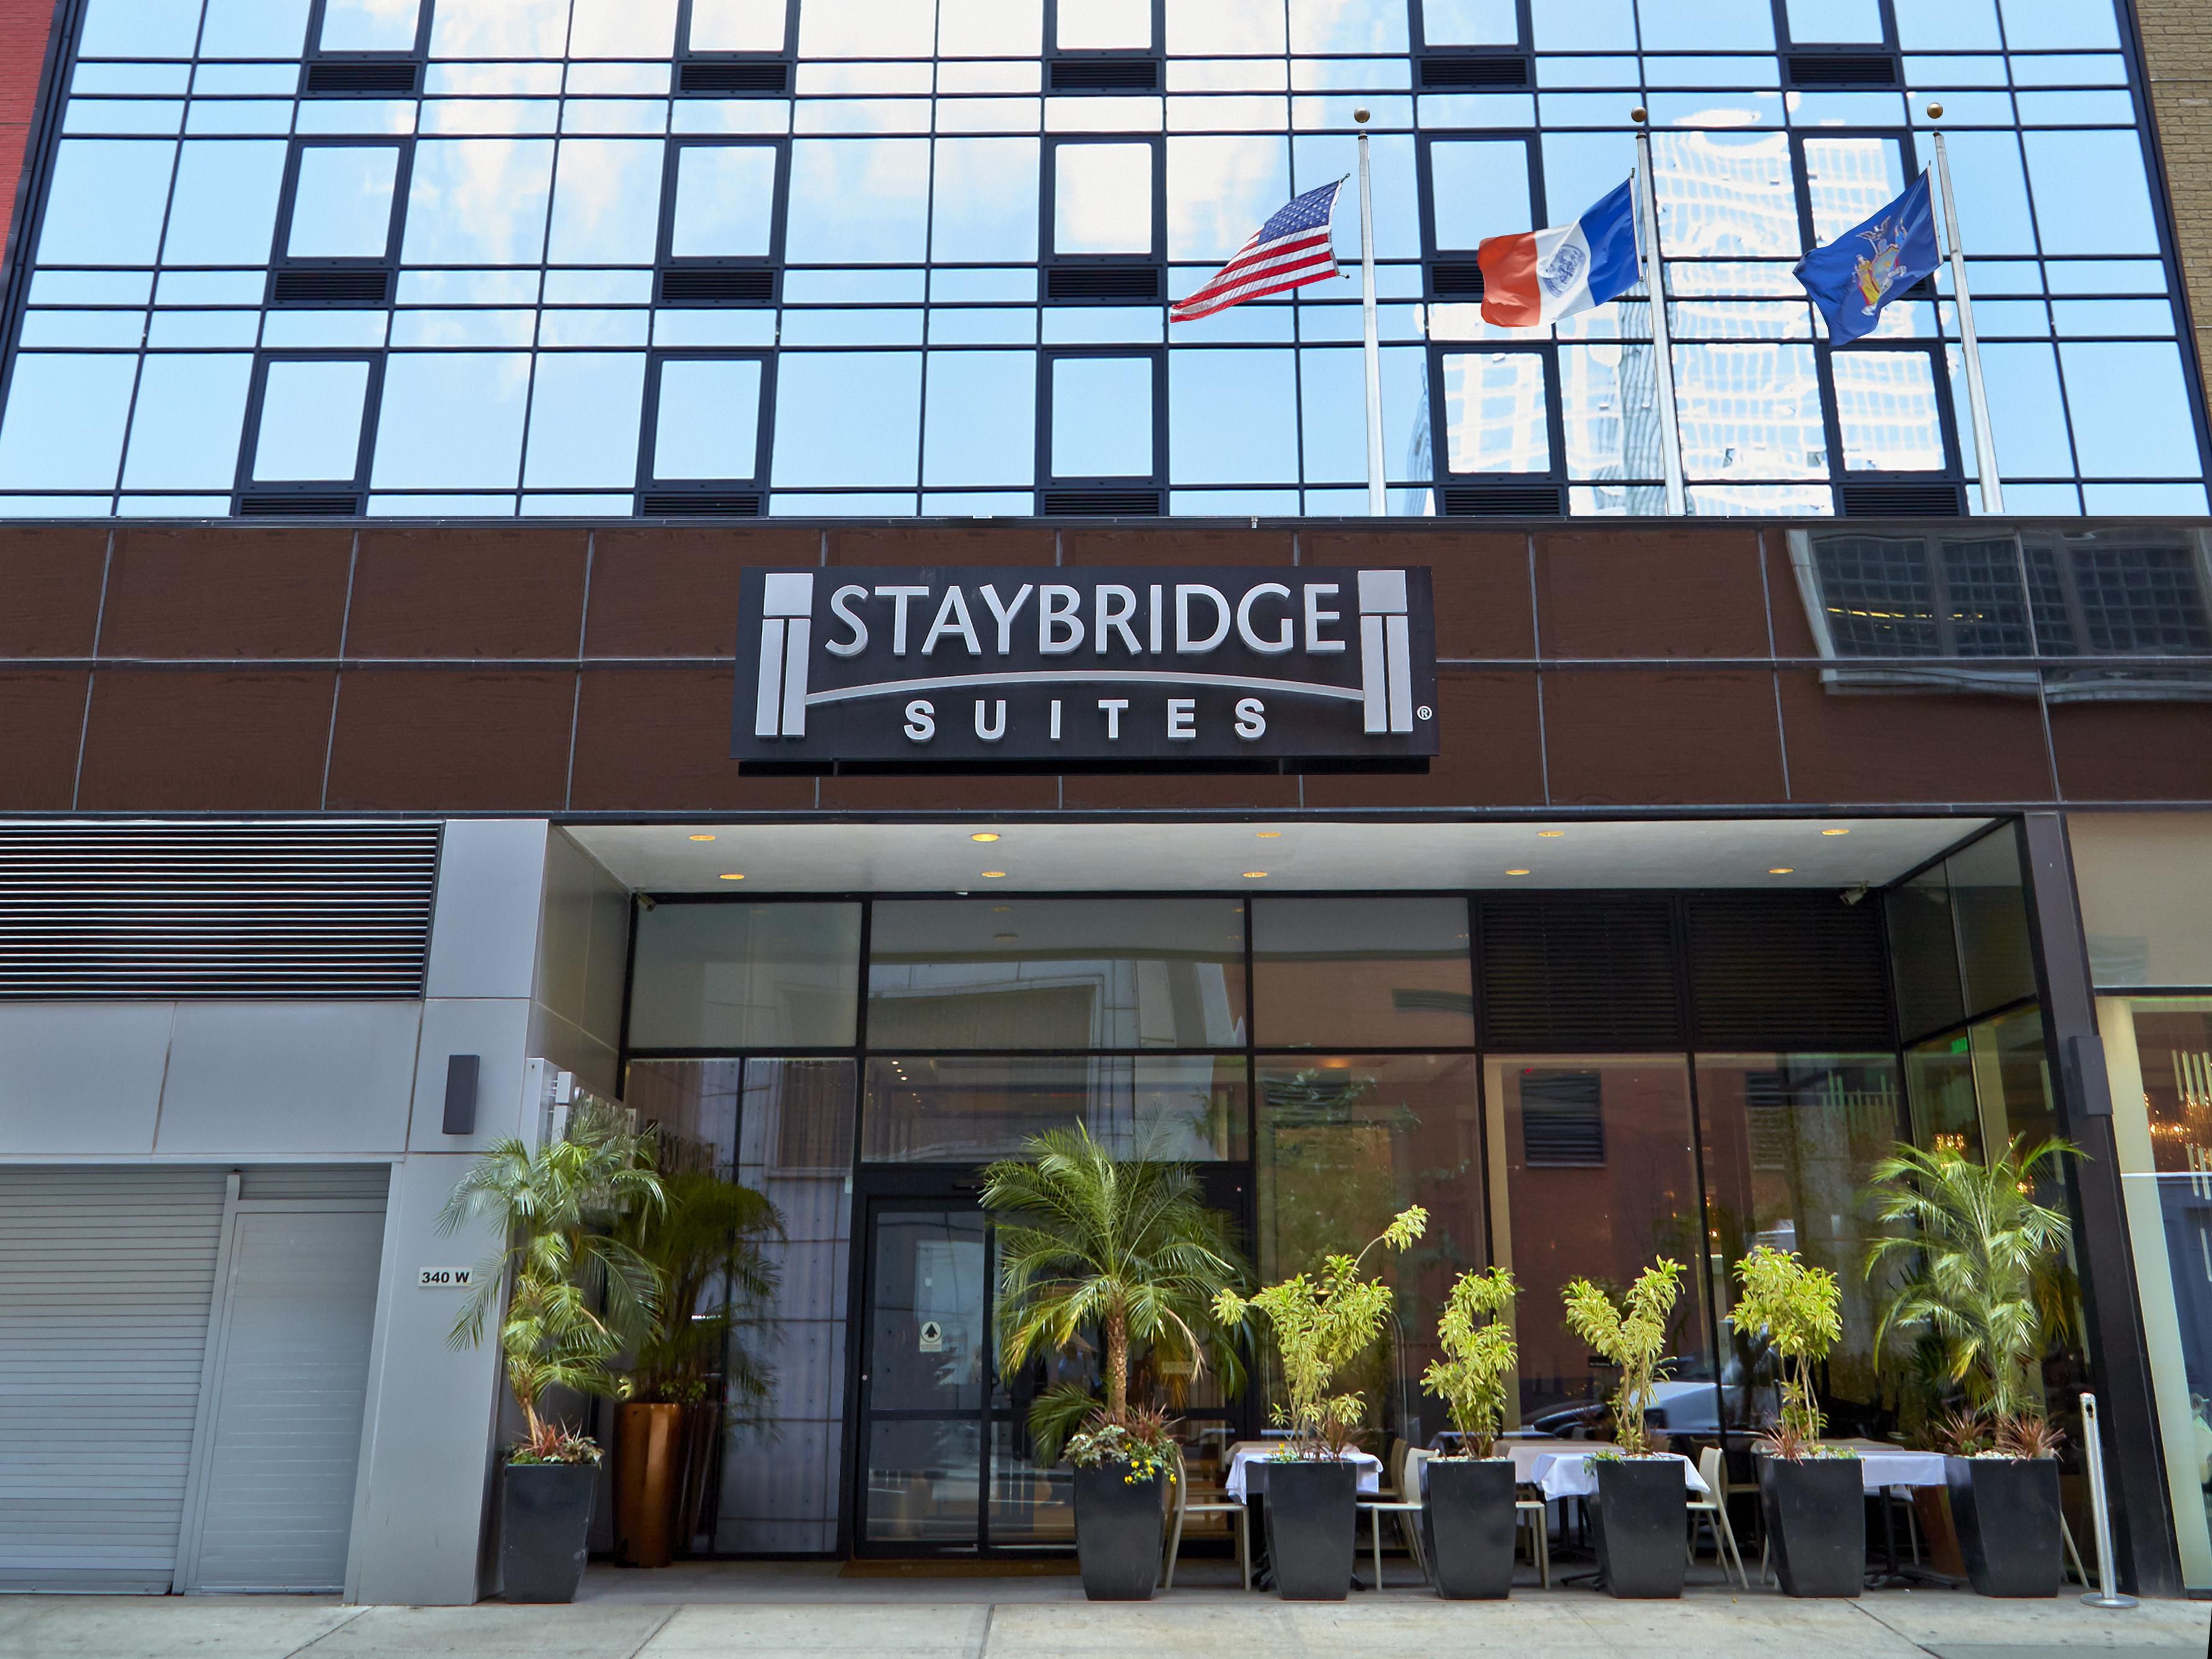 Staybridge Suites Times Square NYC | Hotel Suites near ...